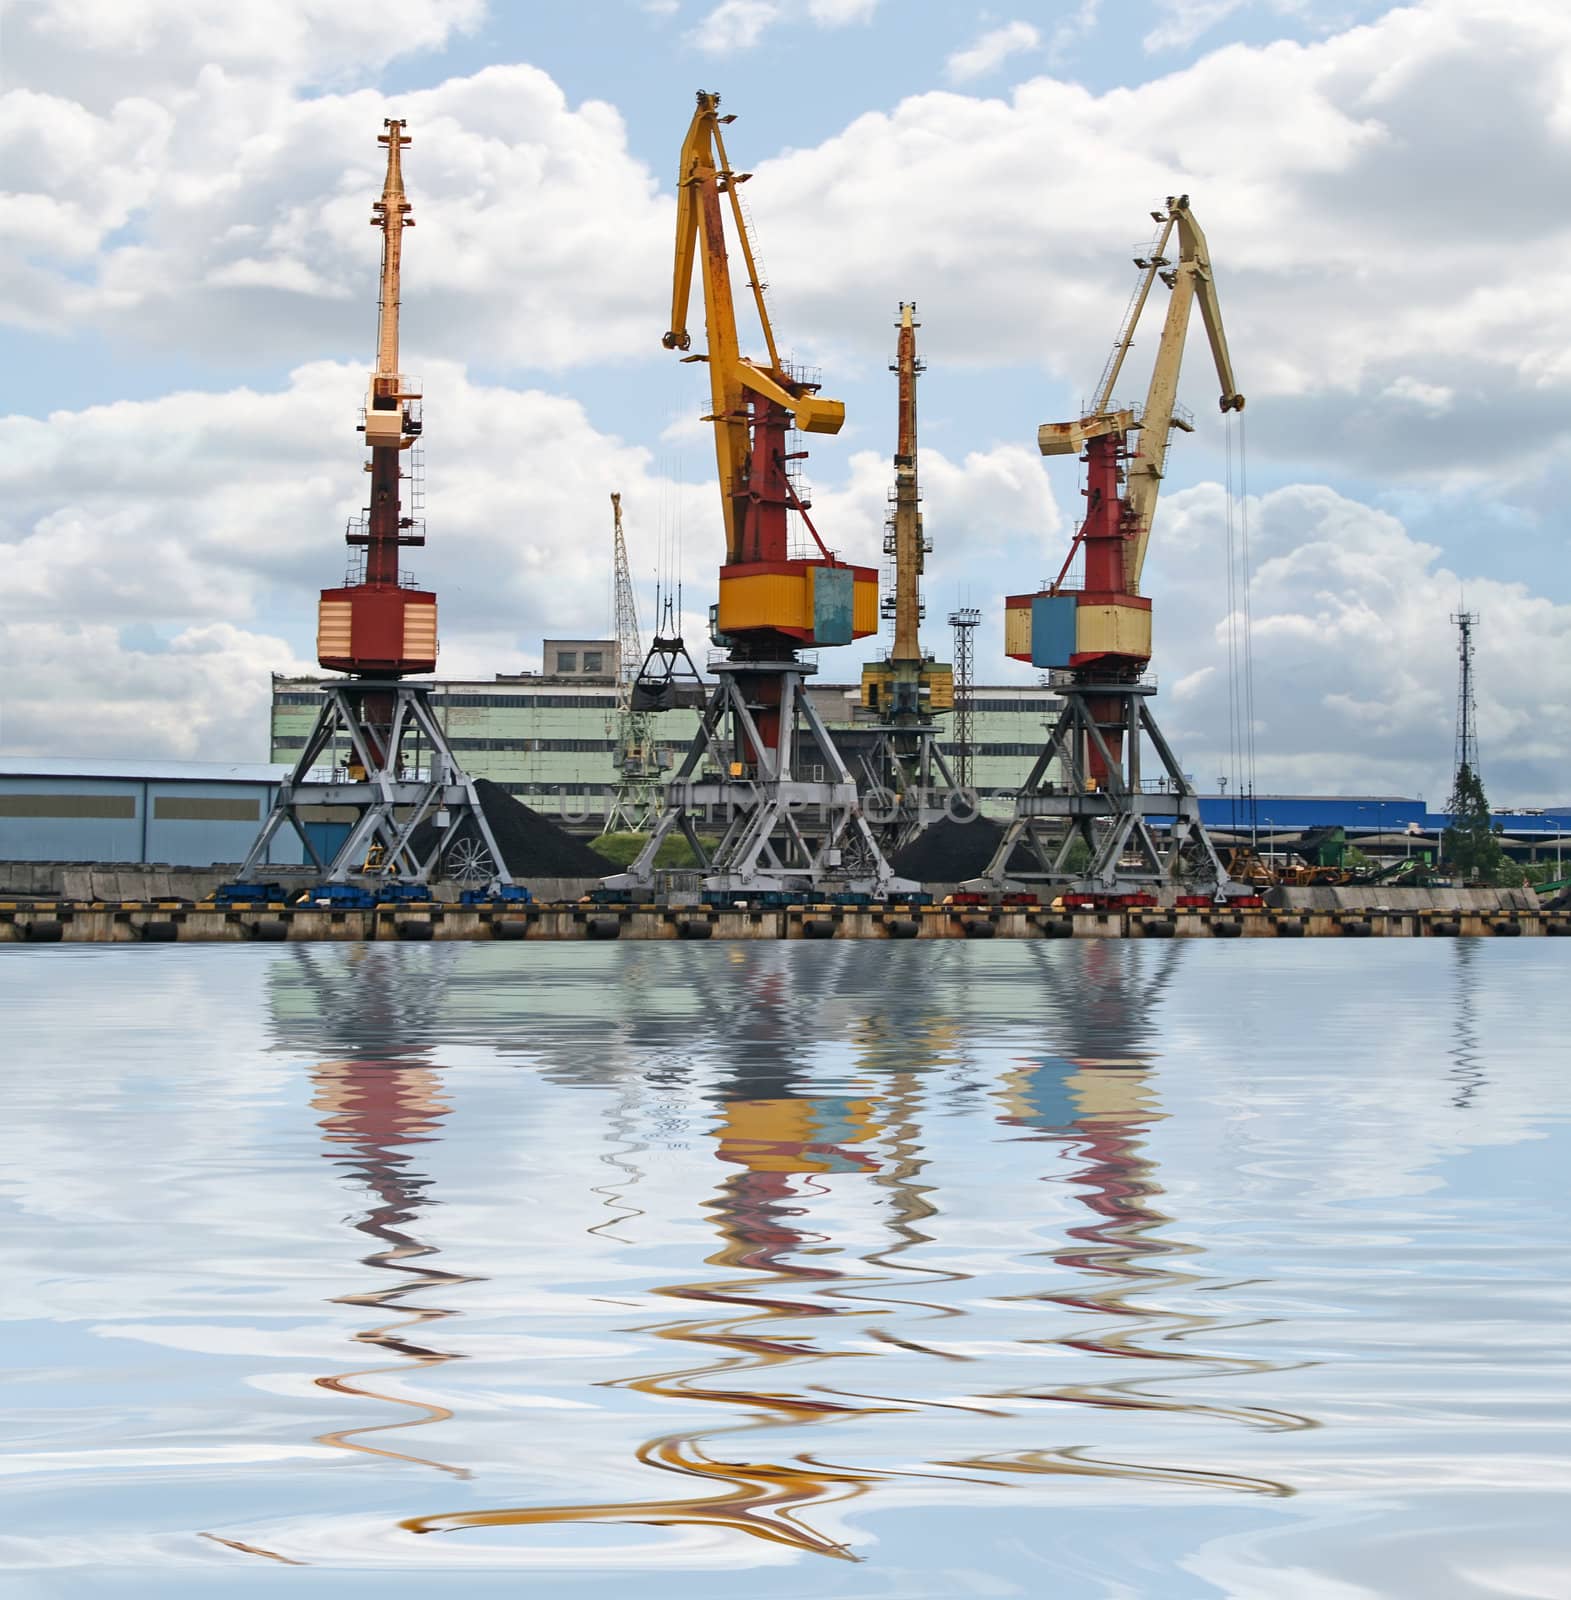 Container cranes for loading and unloading ships. Reflection over water.